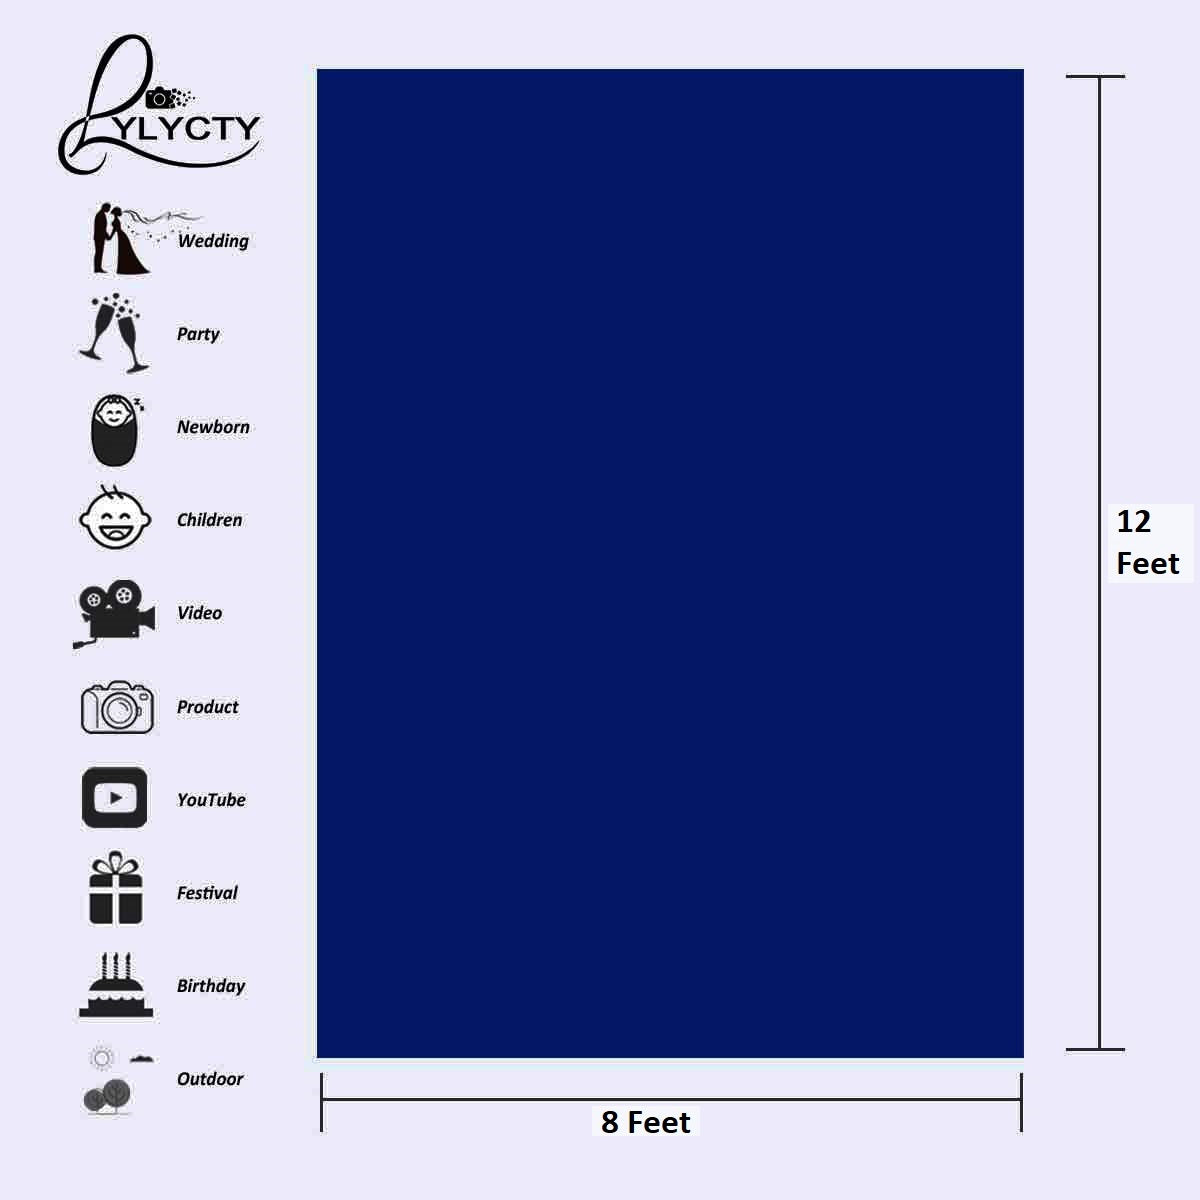 Lycra Wrinkle Resistant Blue Screen Photography Background Cloth for Photoshoot Portrait Video Shooting (8x12 ft) (Blue)